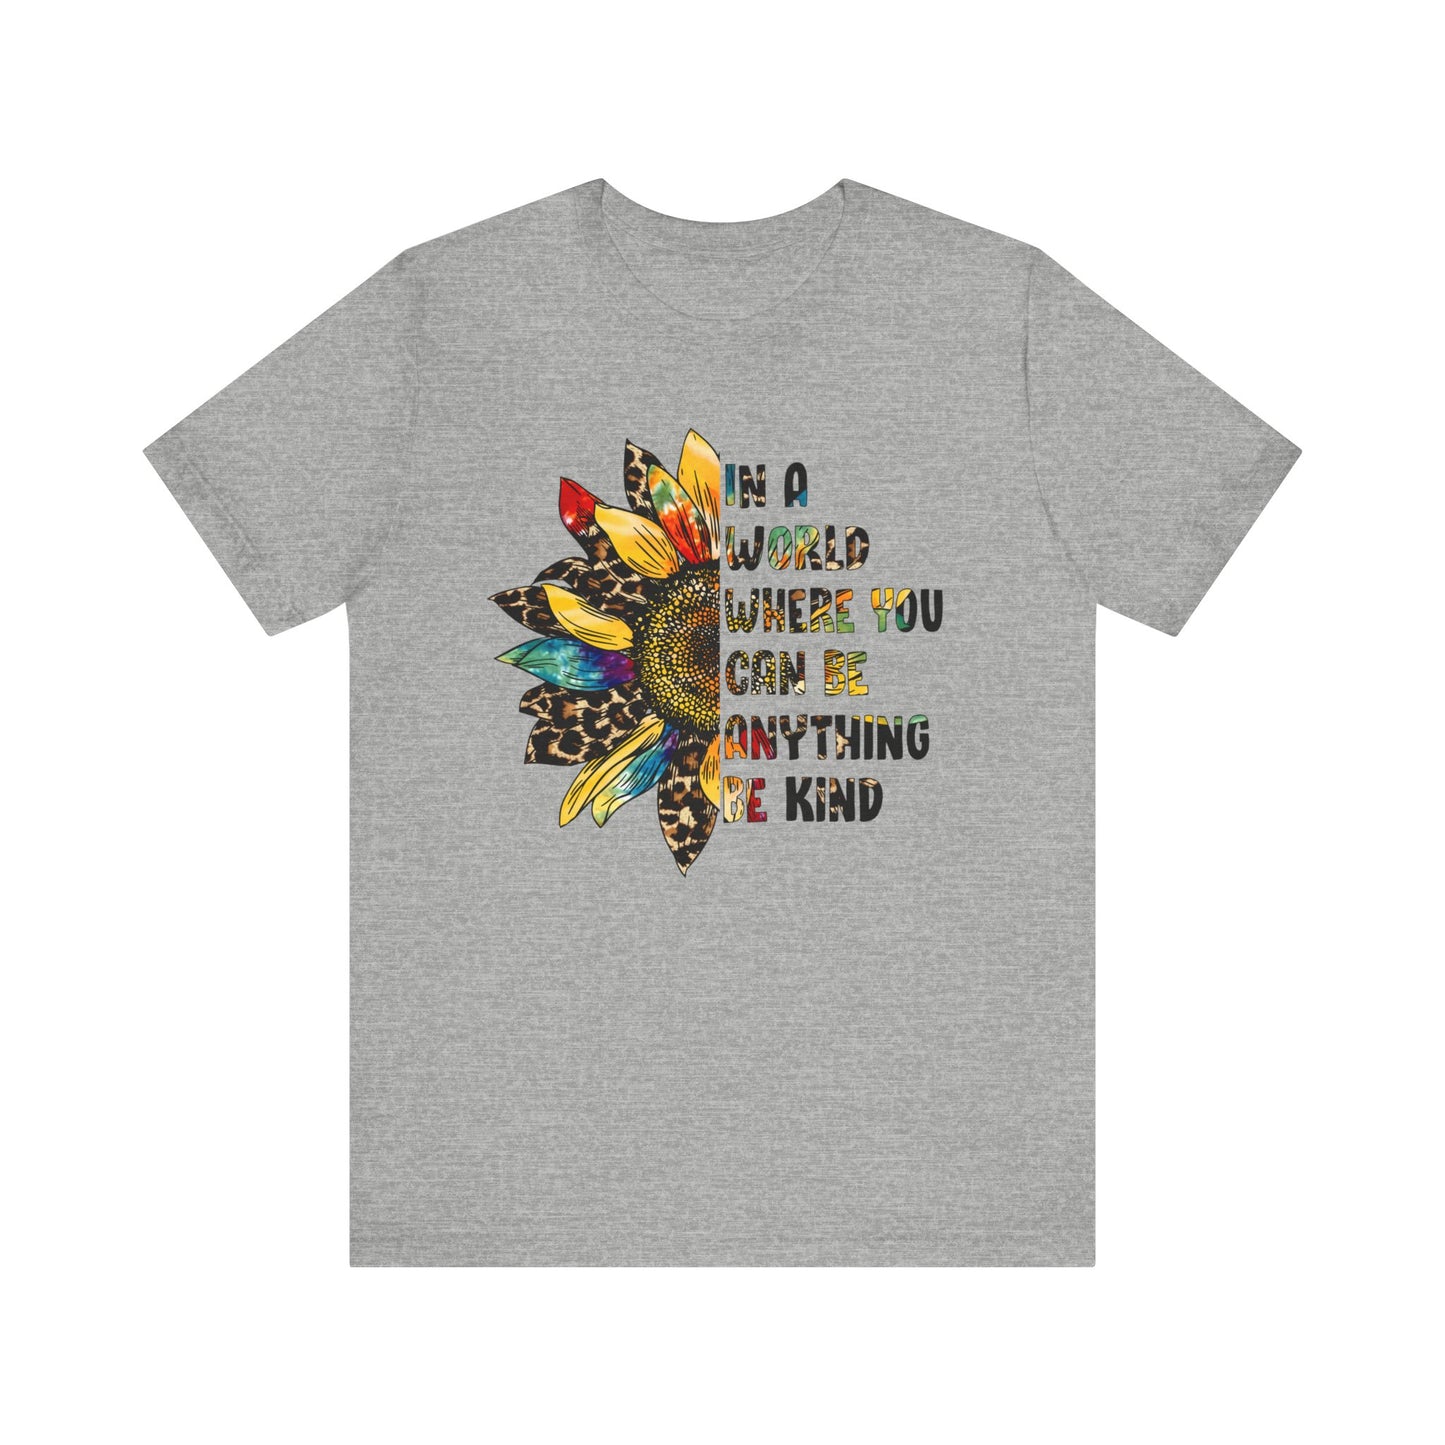 In a World Where You Can Be Anything Be Kind - Short Sleeve Tee